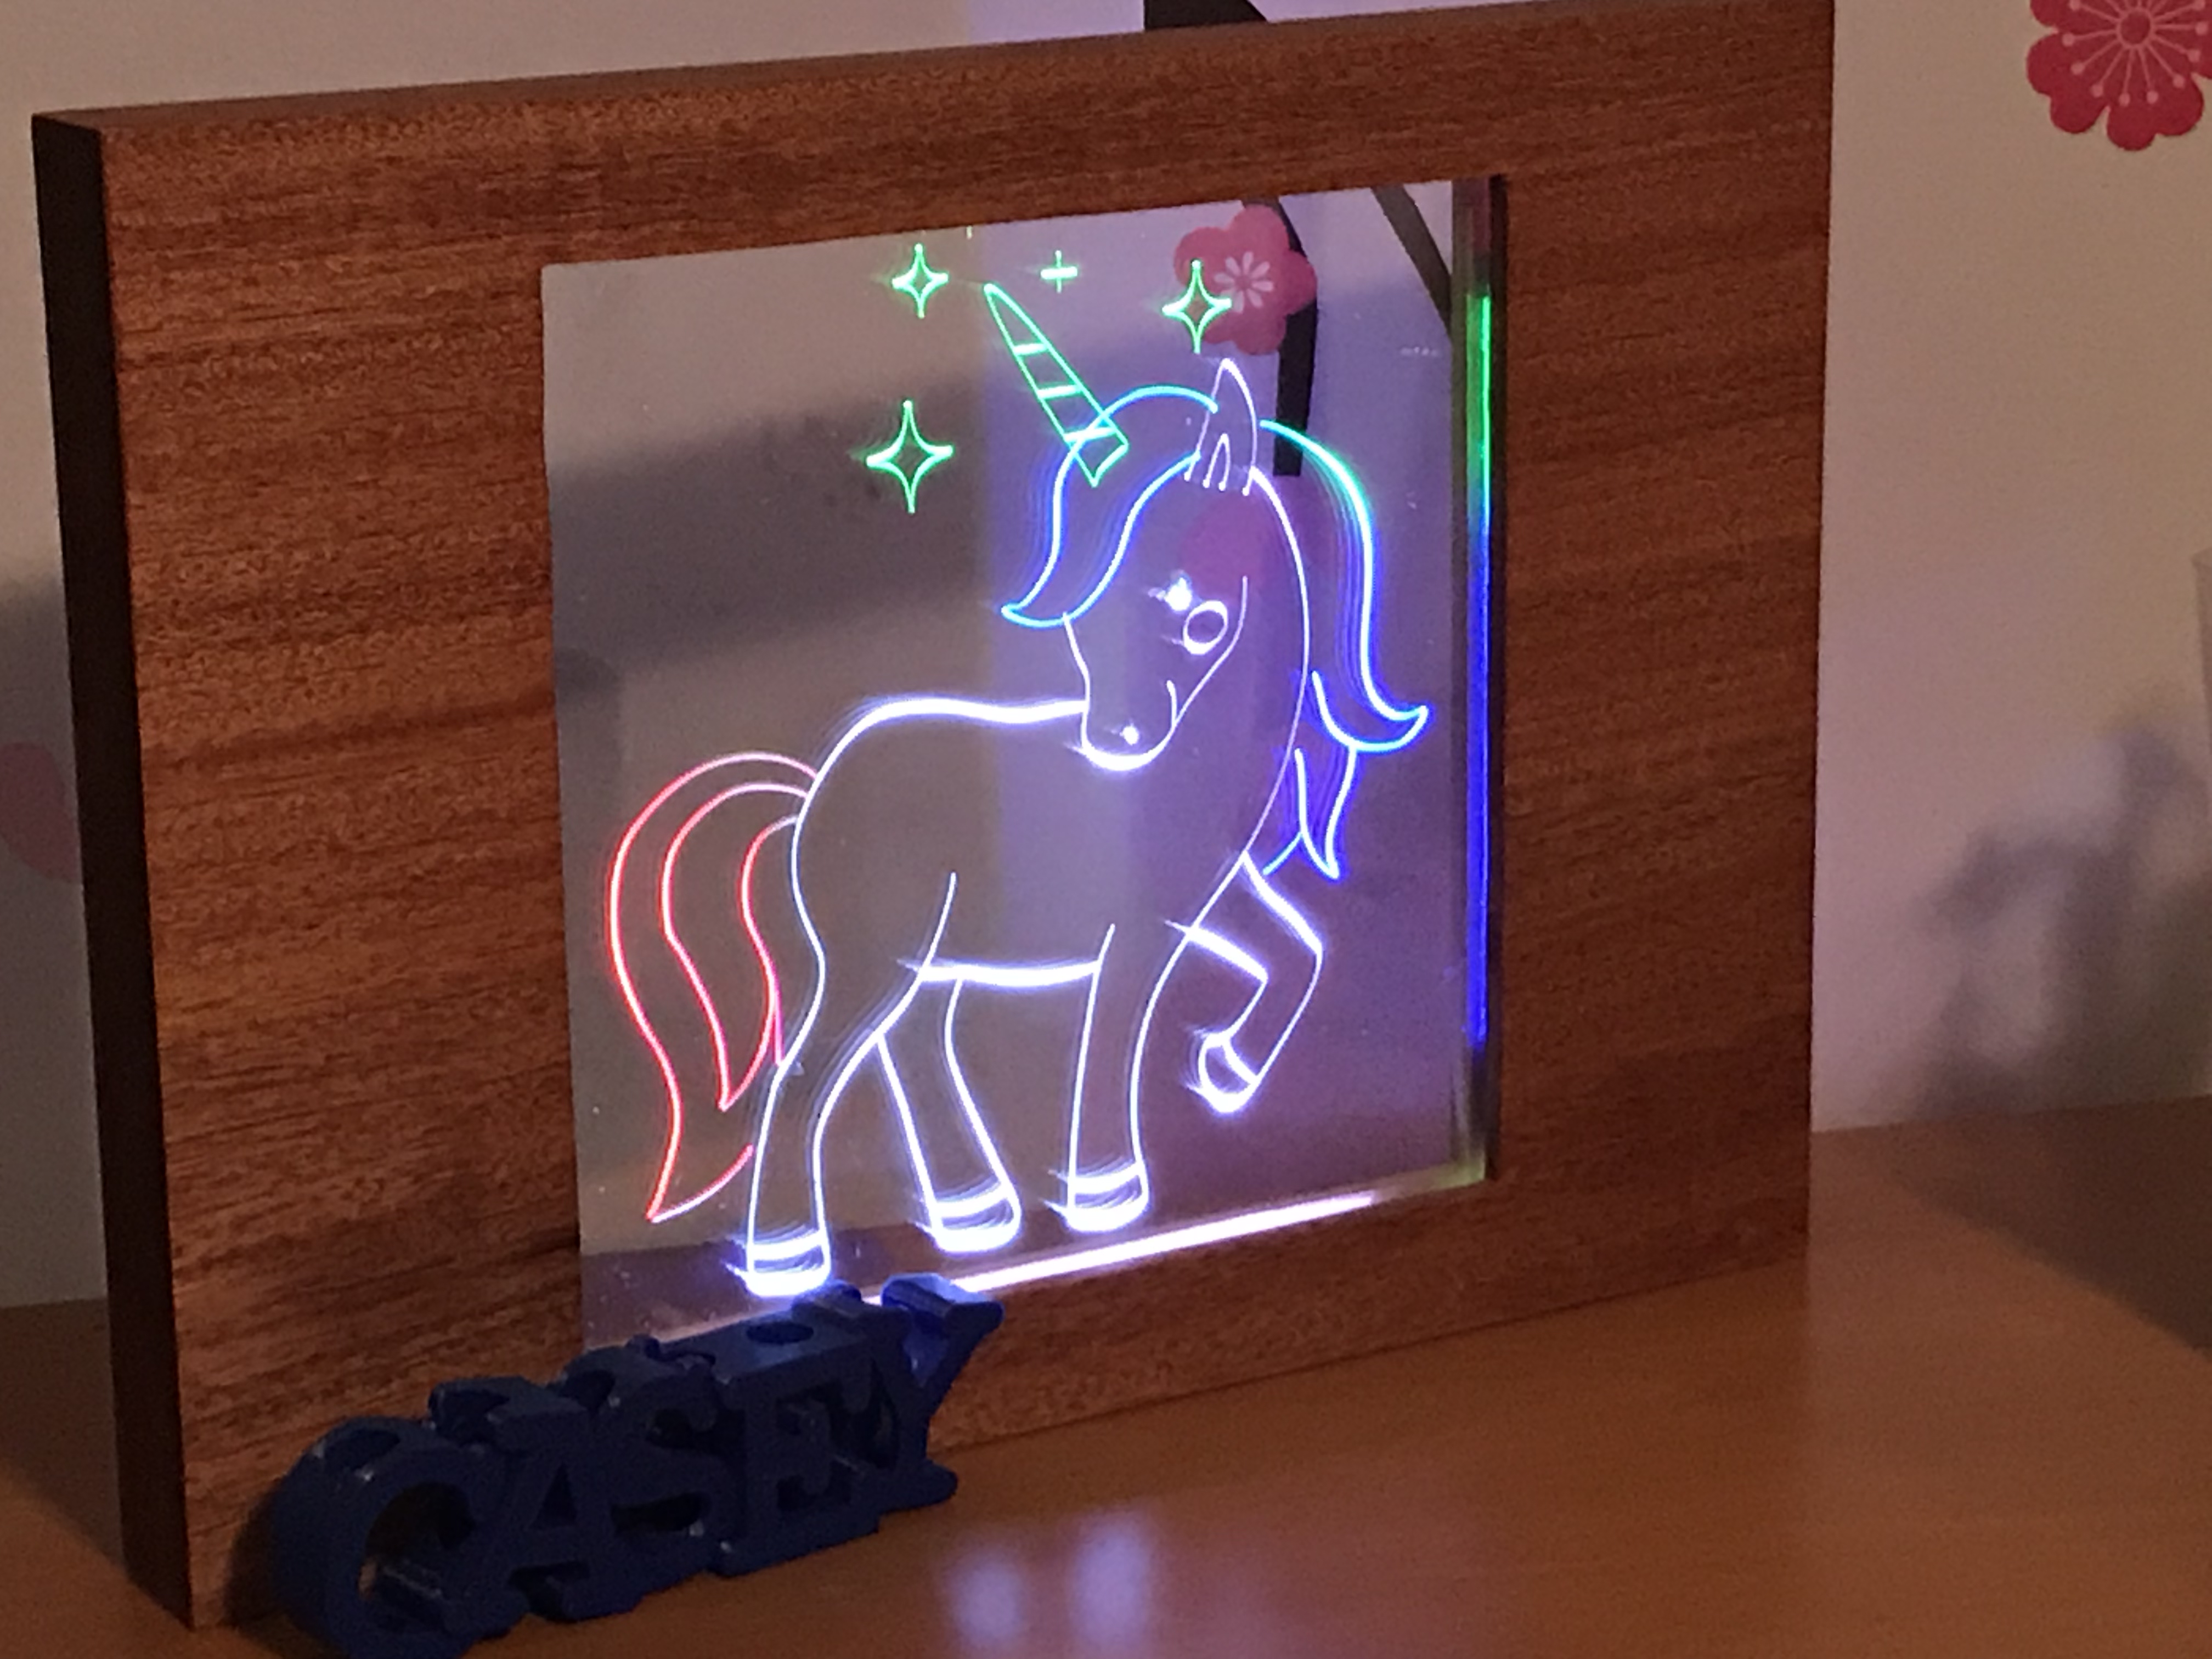 The full unicorn frame and acrylic, assembled and lit